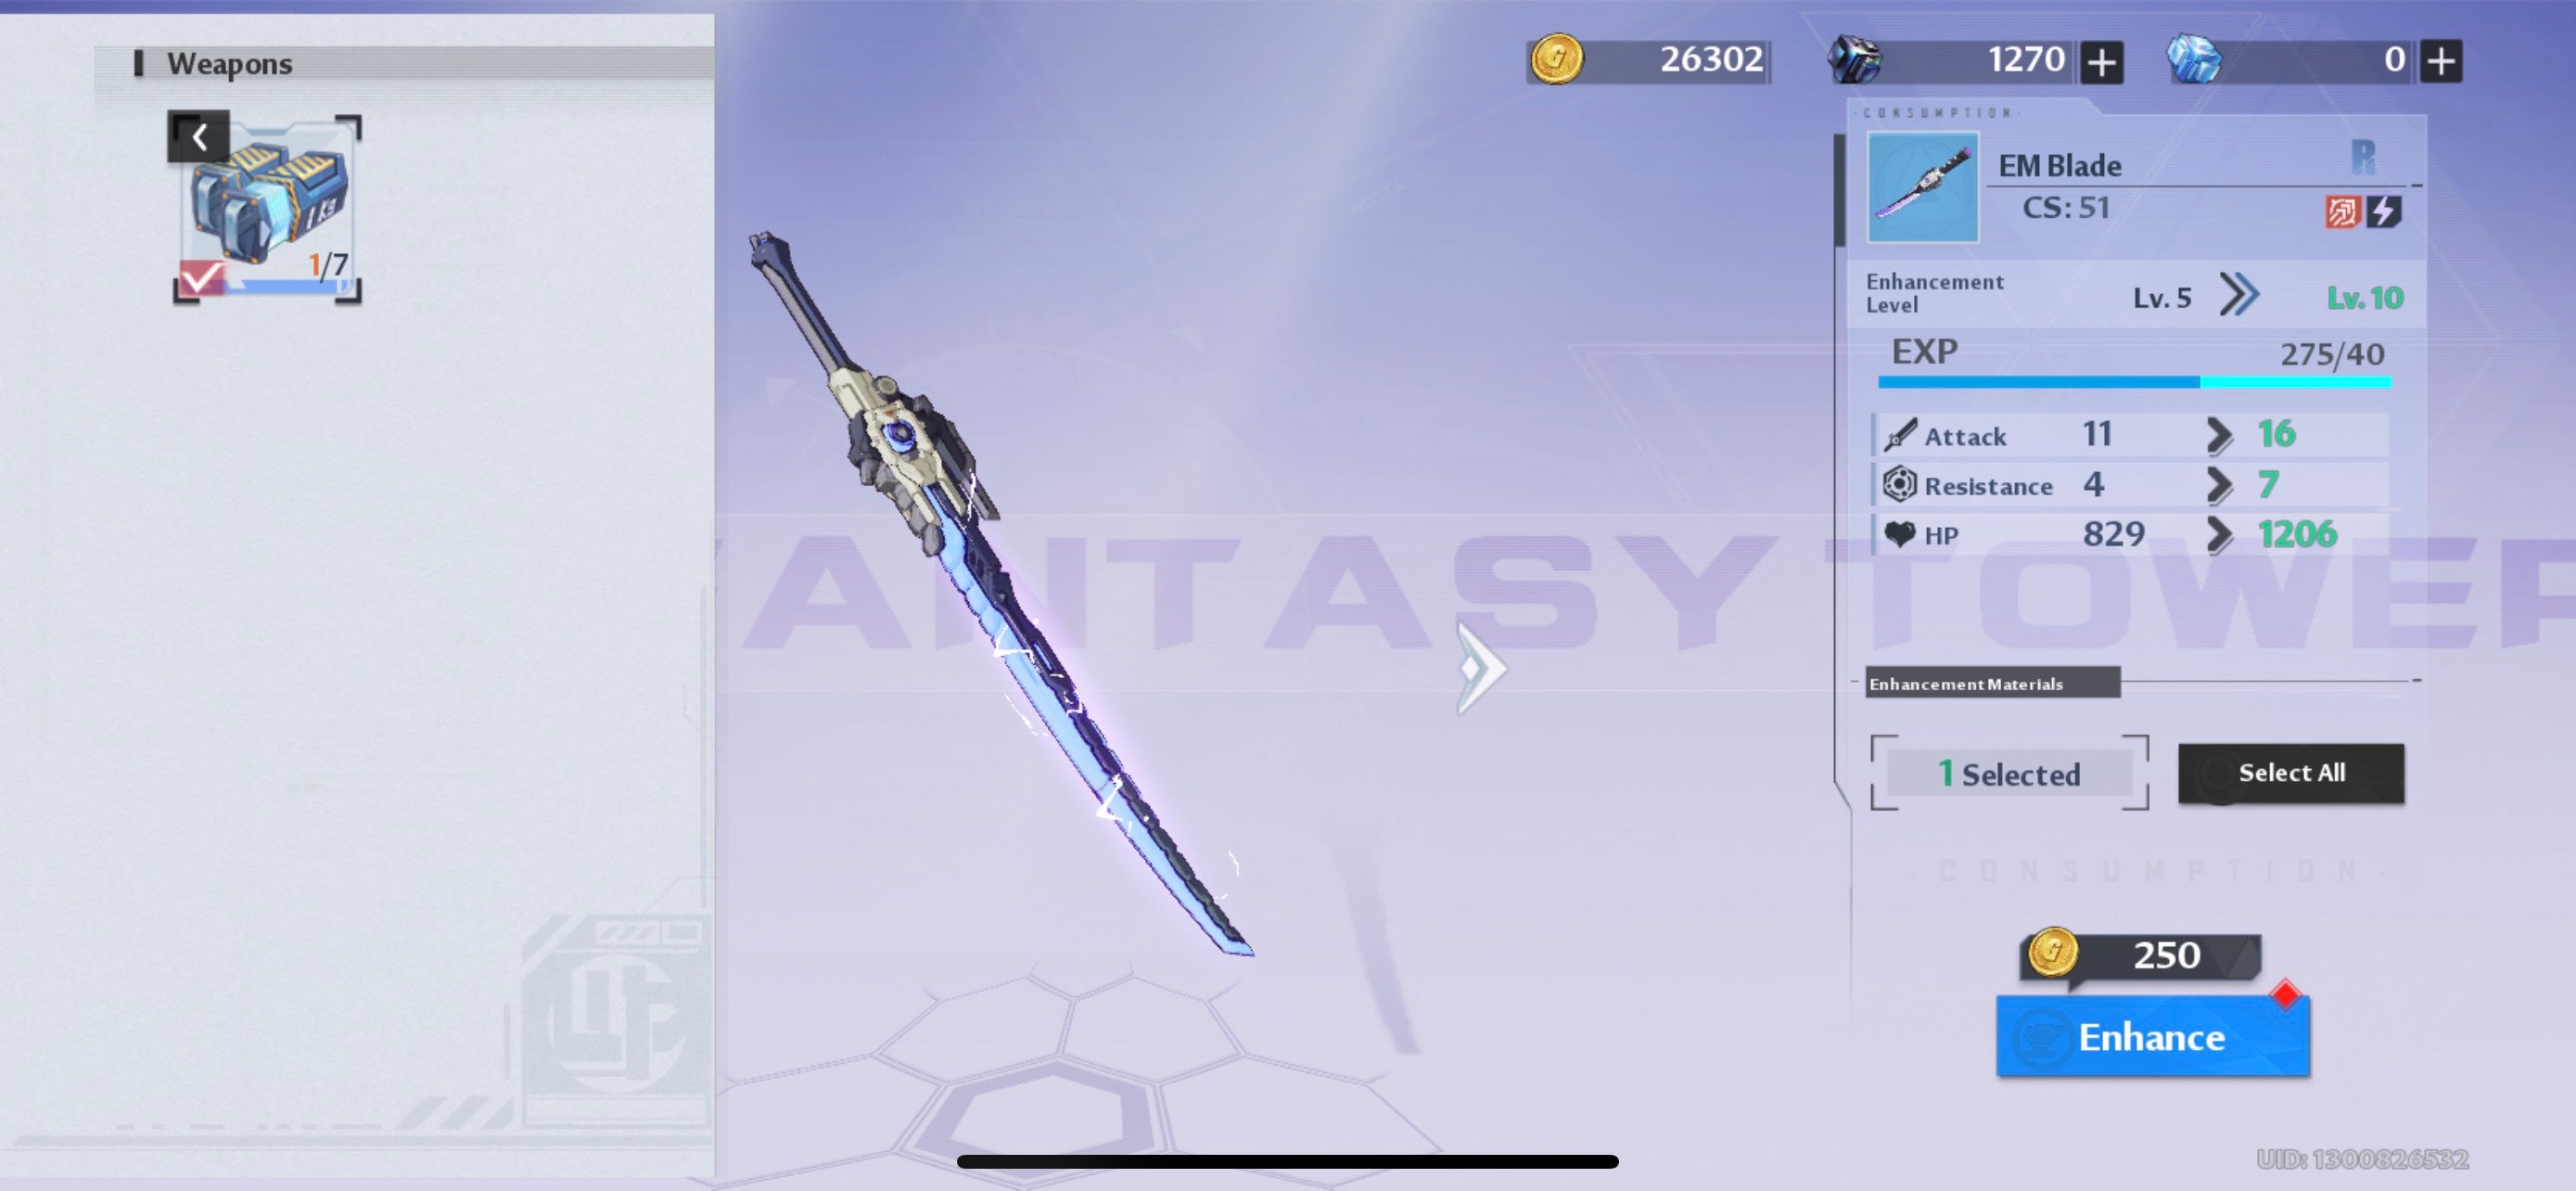 The weapon enhancement menu for the EM Blade in Tower of Fantasy is shown.